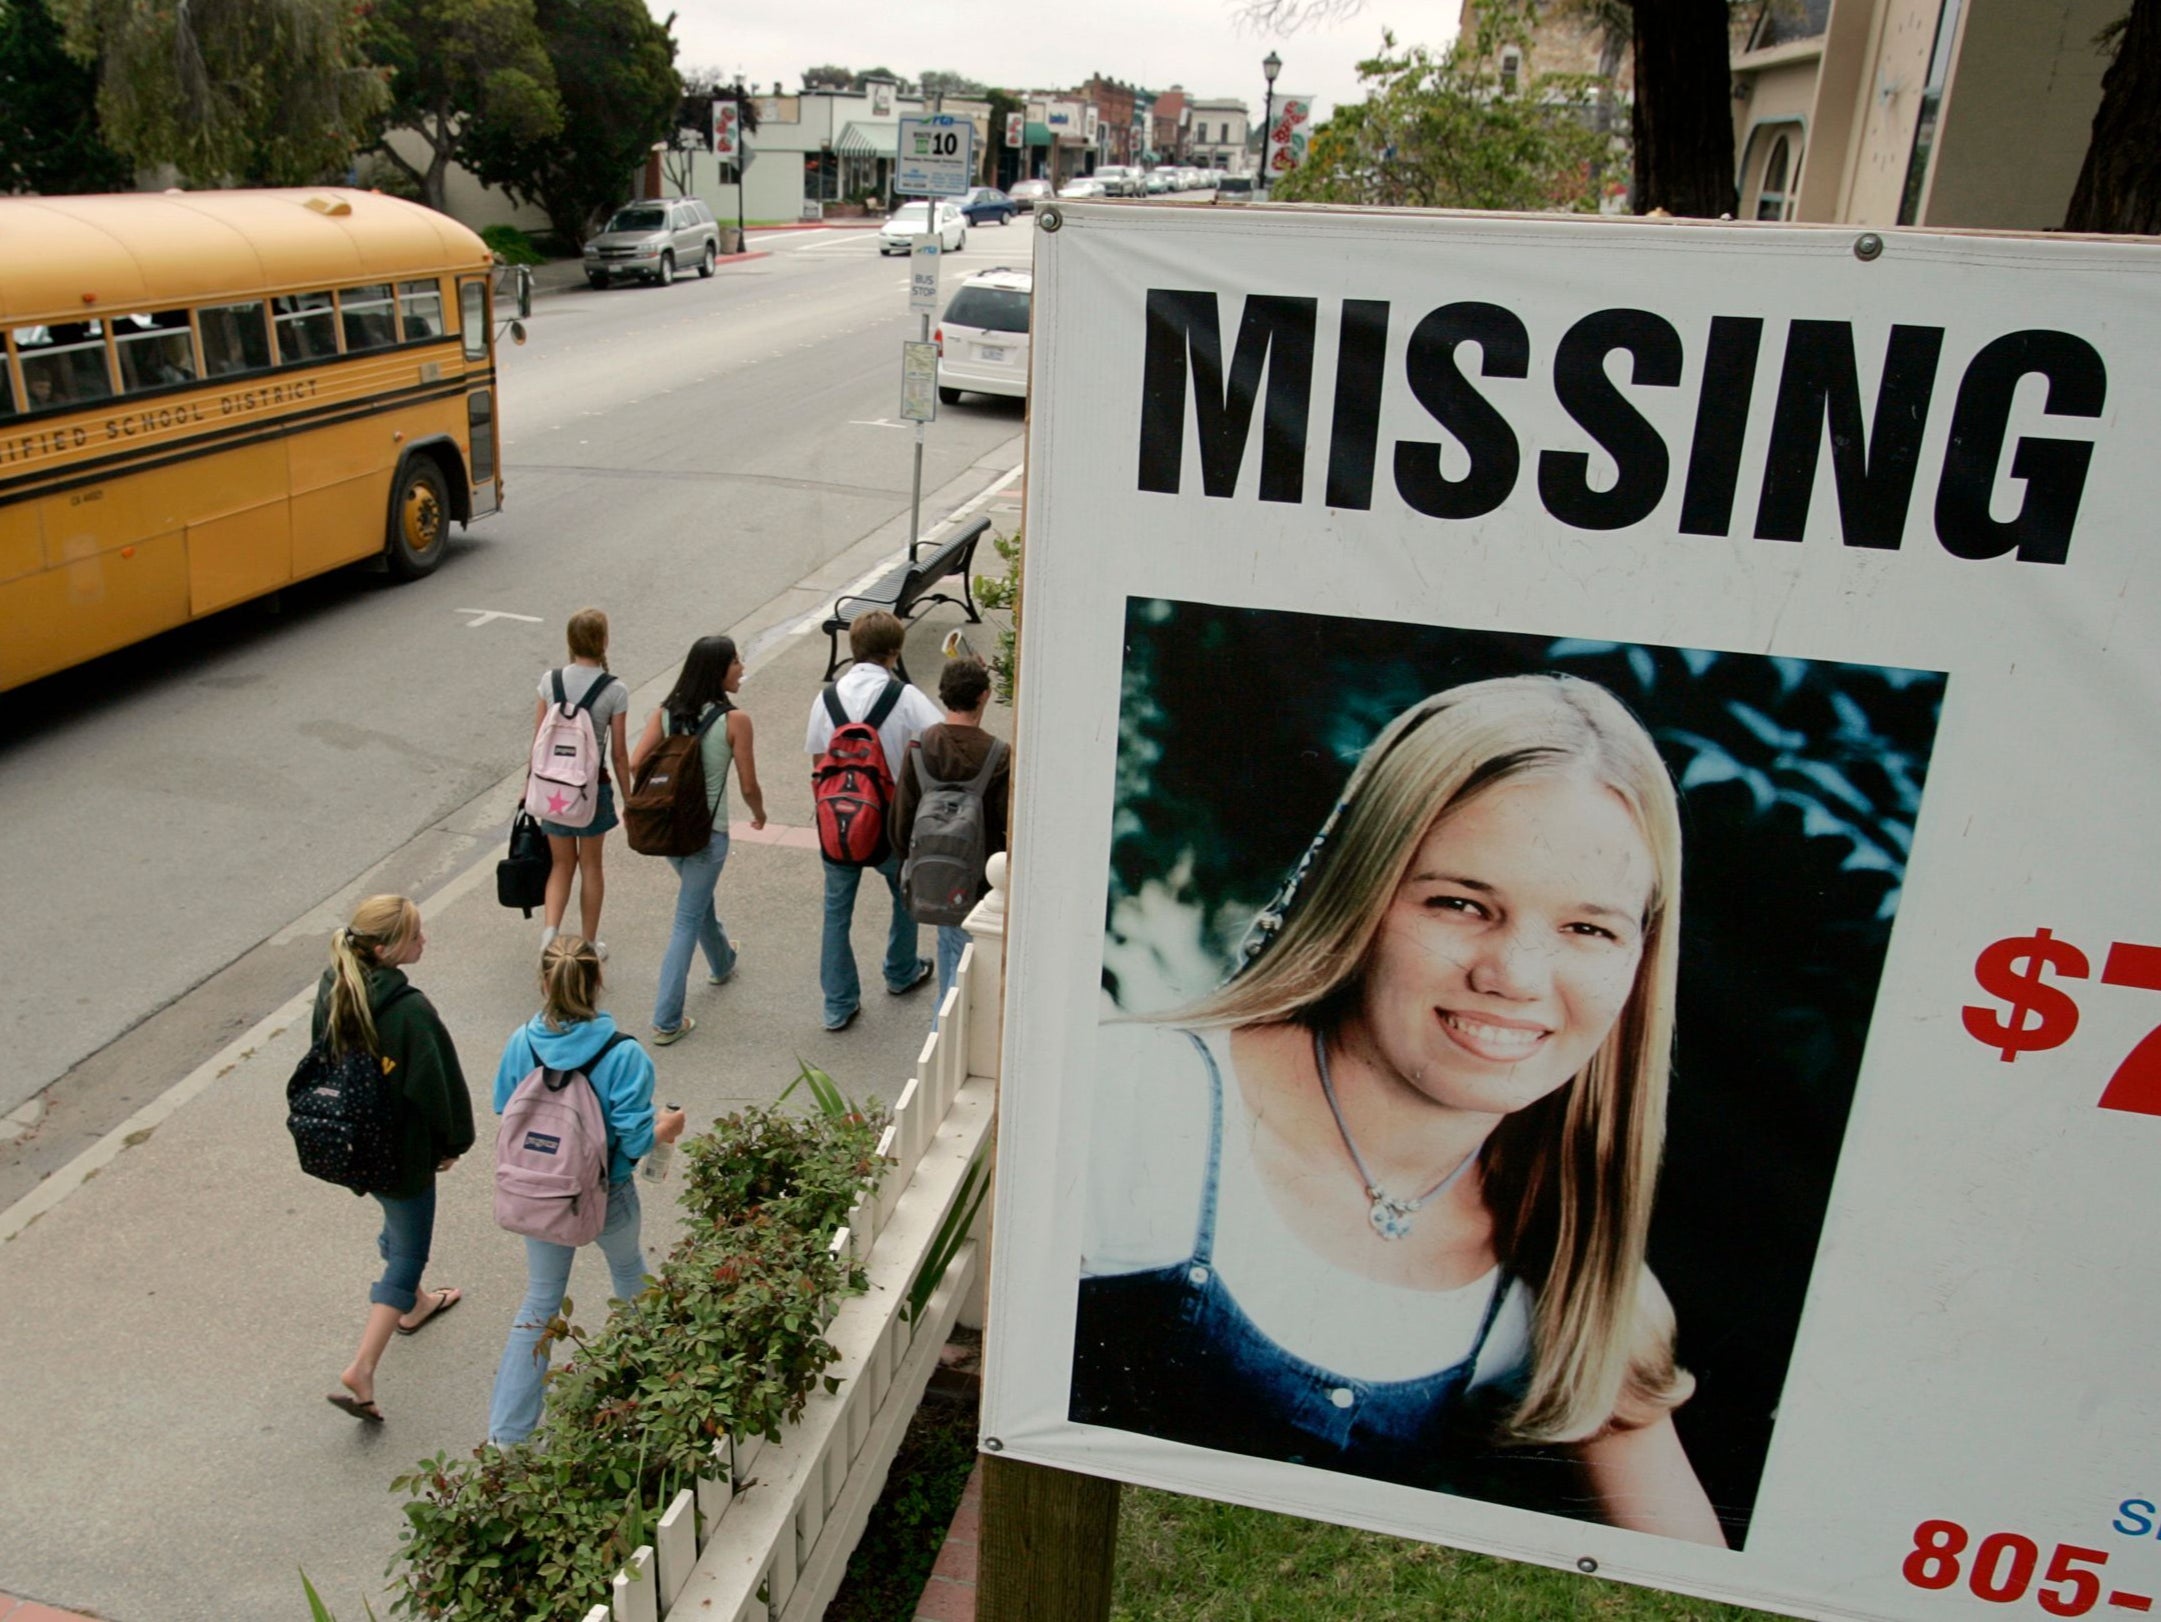 A sign raises public awareness in the case of missing student Kristin Smart in the California coast town of Arroyo Grande in May 2006